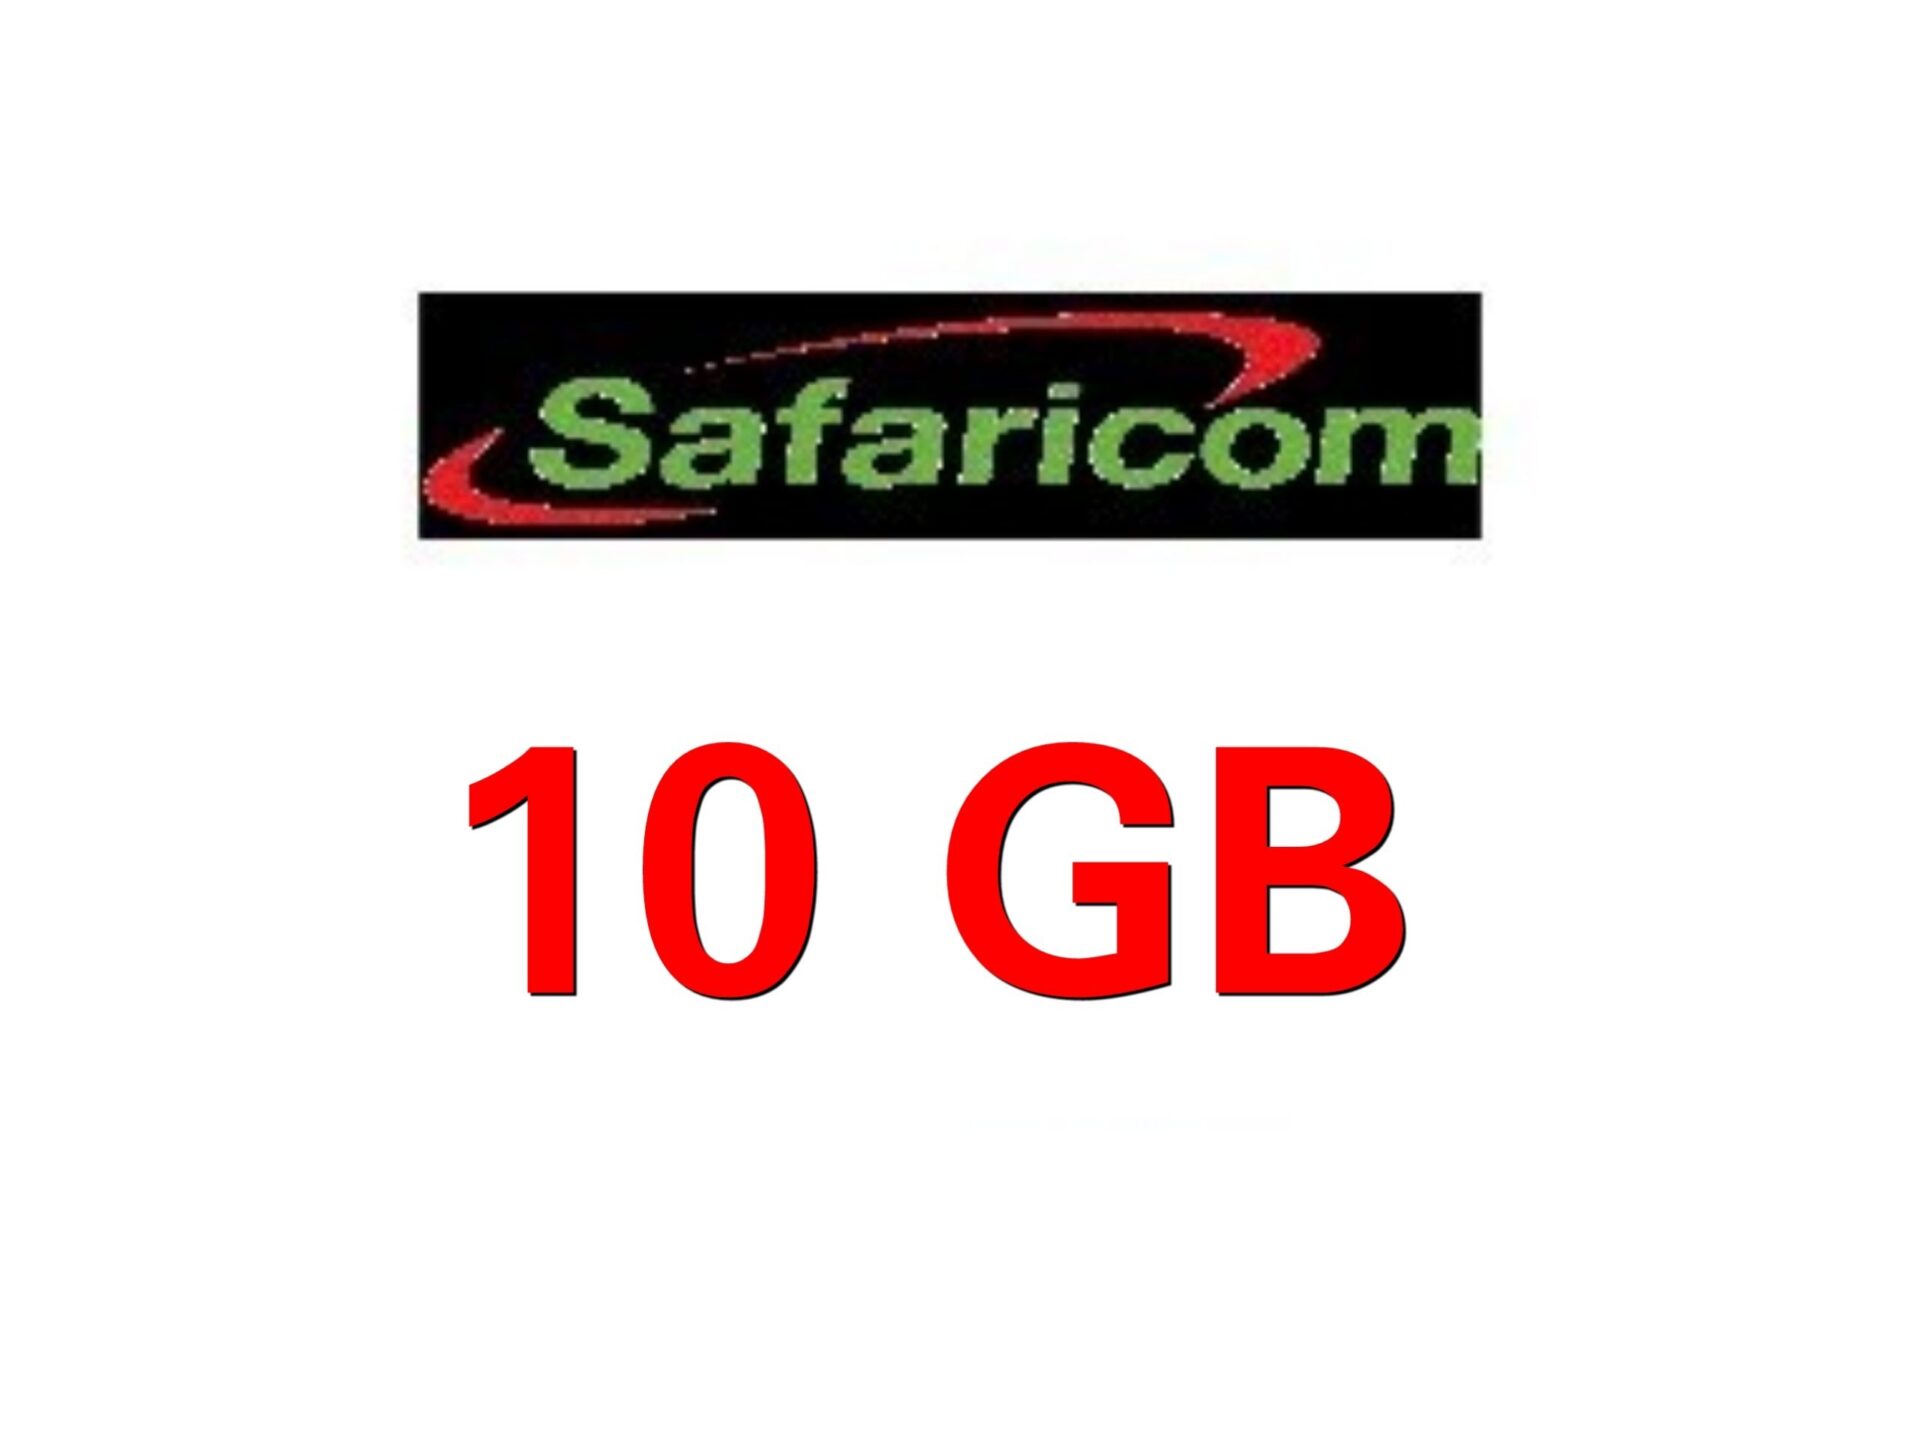 users-connect-to-safaricom-5g-along-waiyaki-way-as-telco-ramps-up-roll-out